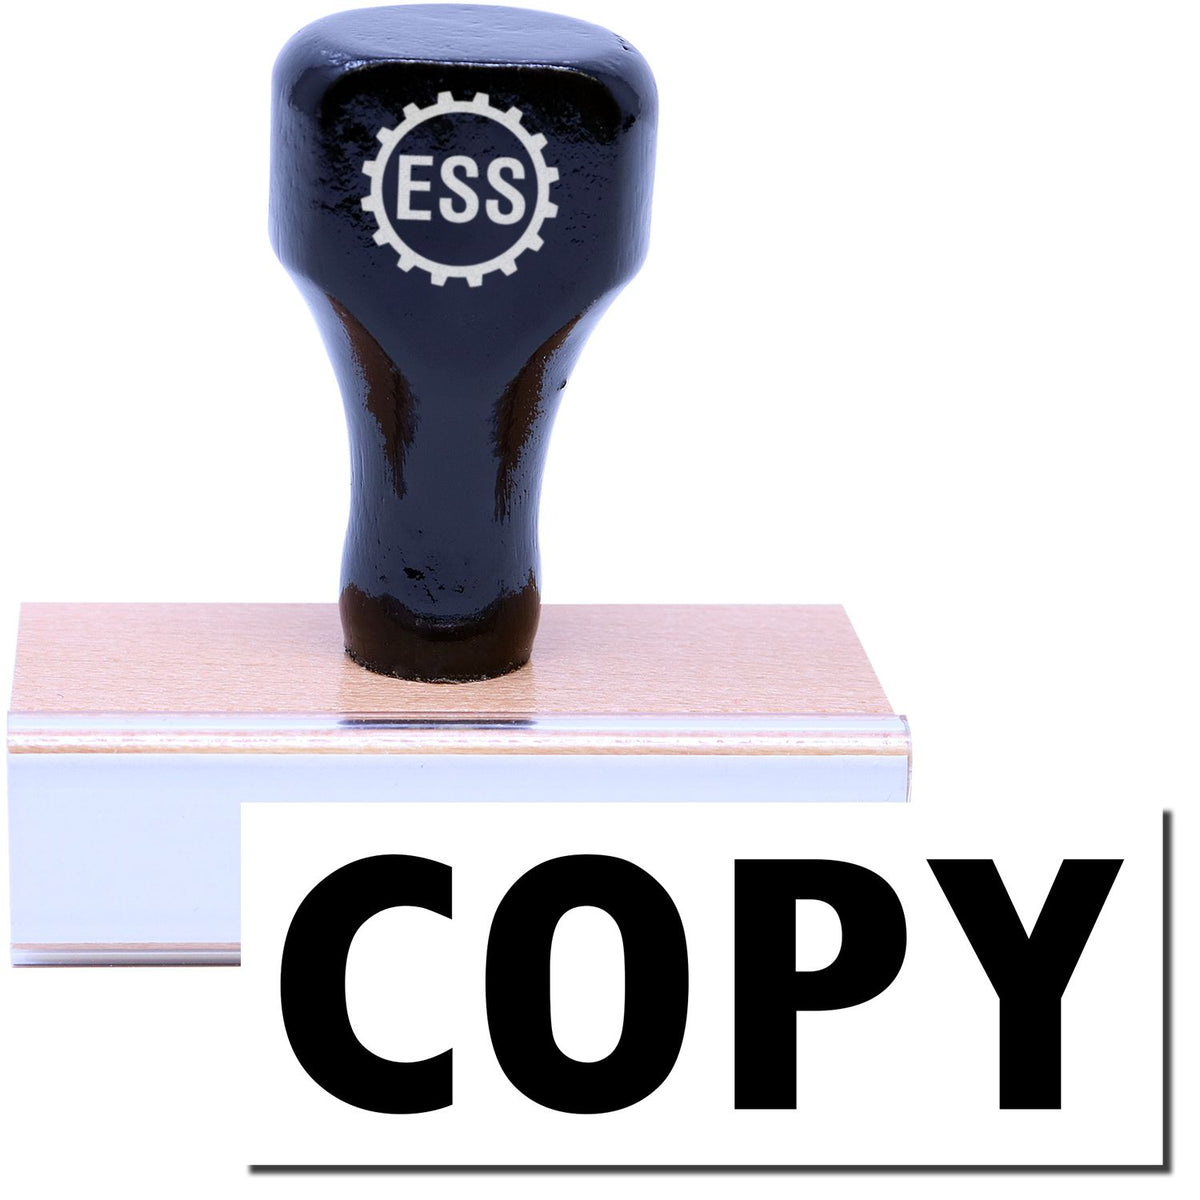 A stock office rubber stamp with a stamped image showing how the text &quot;COPY&quot; in a large font is displayed after stamping.